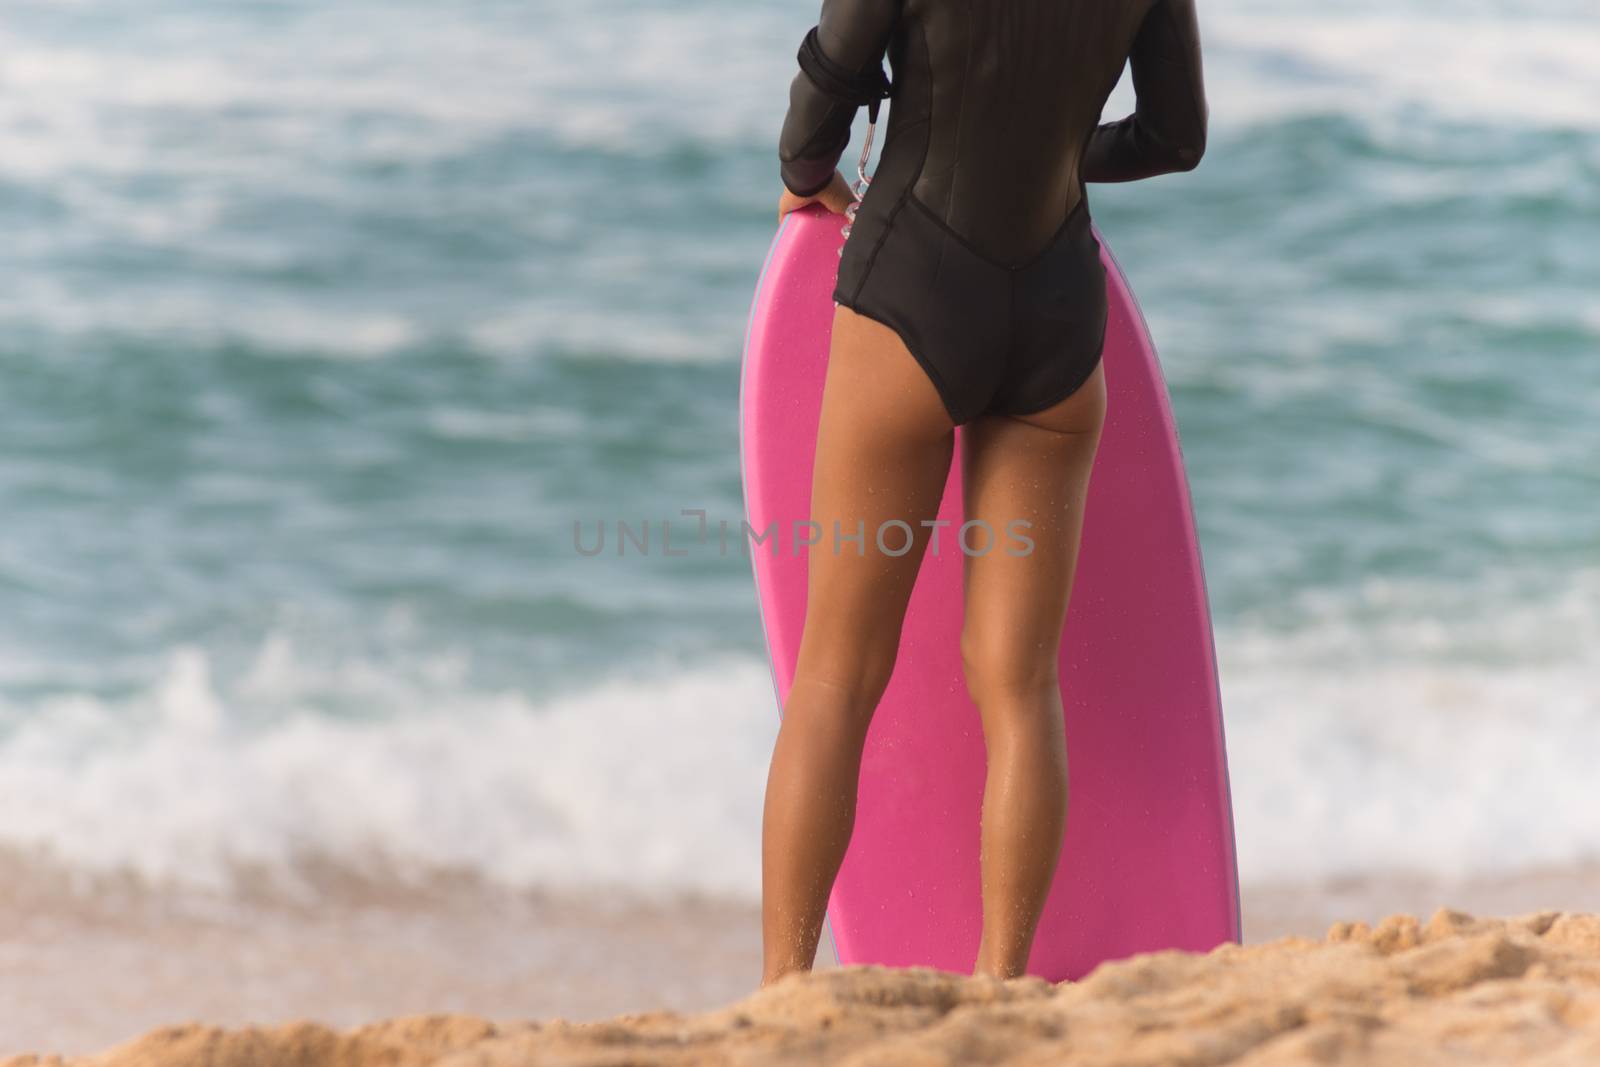 Female Surfer Stands Beach Watching Surf Waiting Pink Body Board by ChrisBoswell